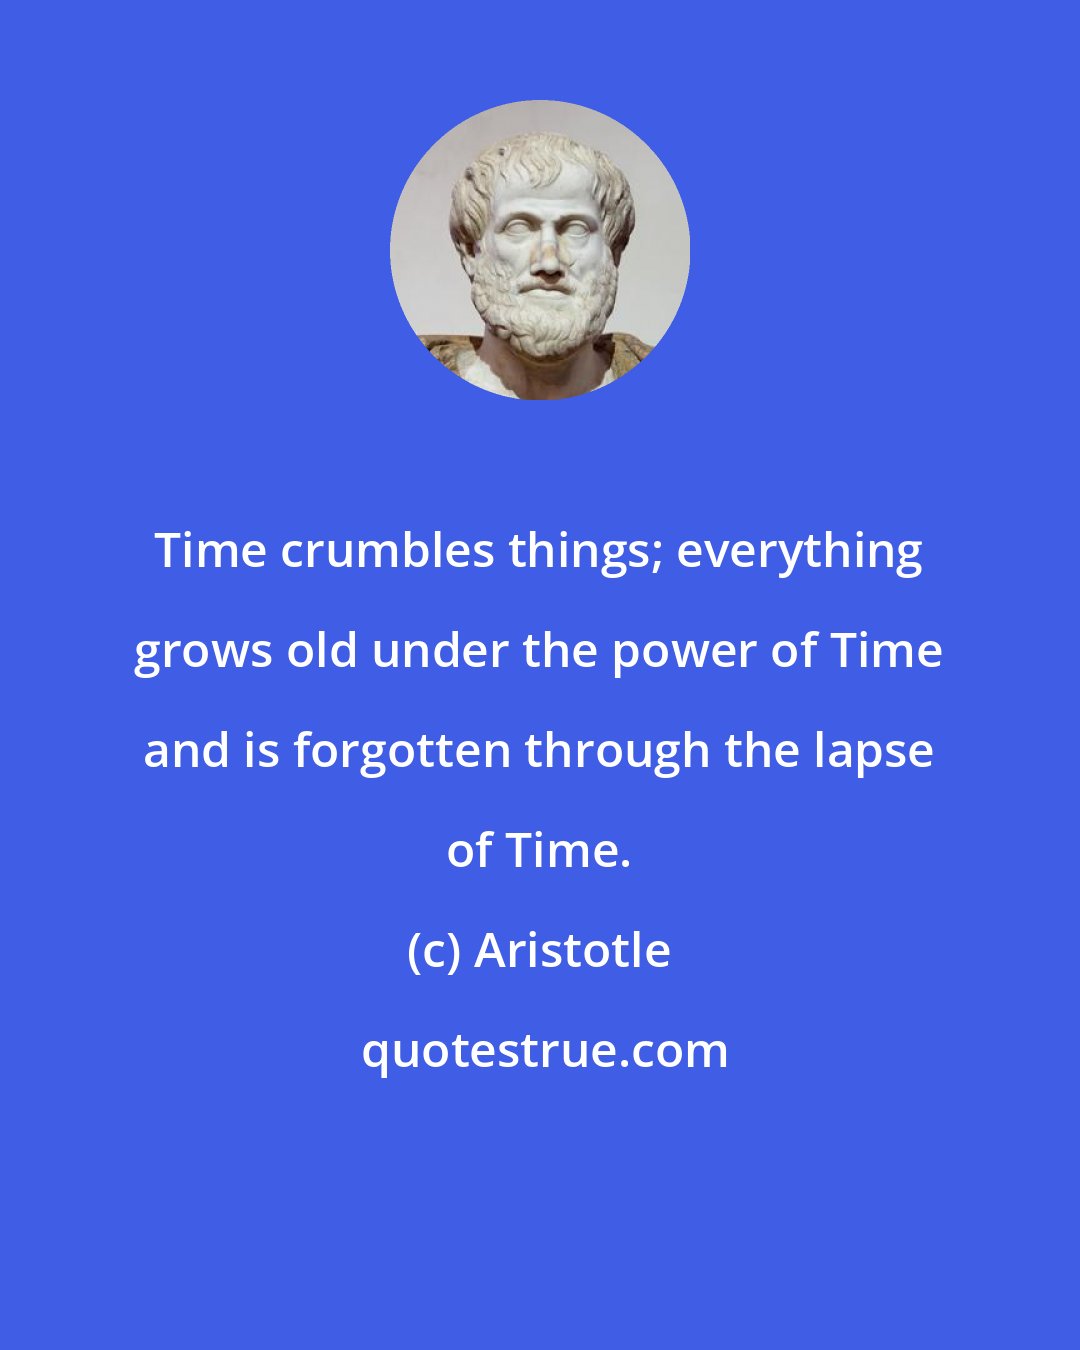 Aristotle: Time crumbles things; everything grows old under the power of Time and is forgotten through the lapse of Time.